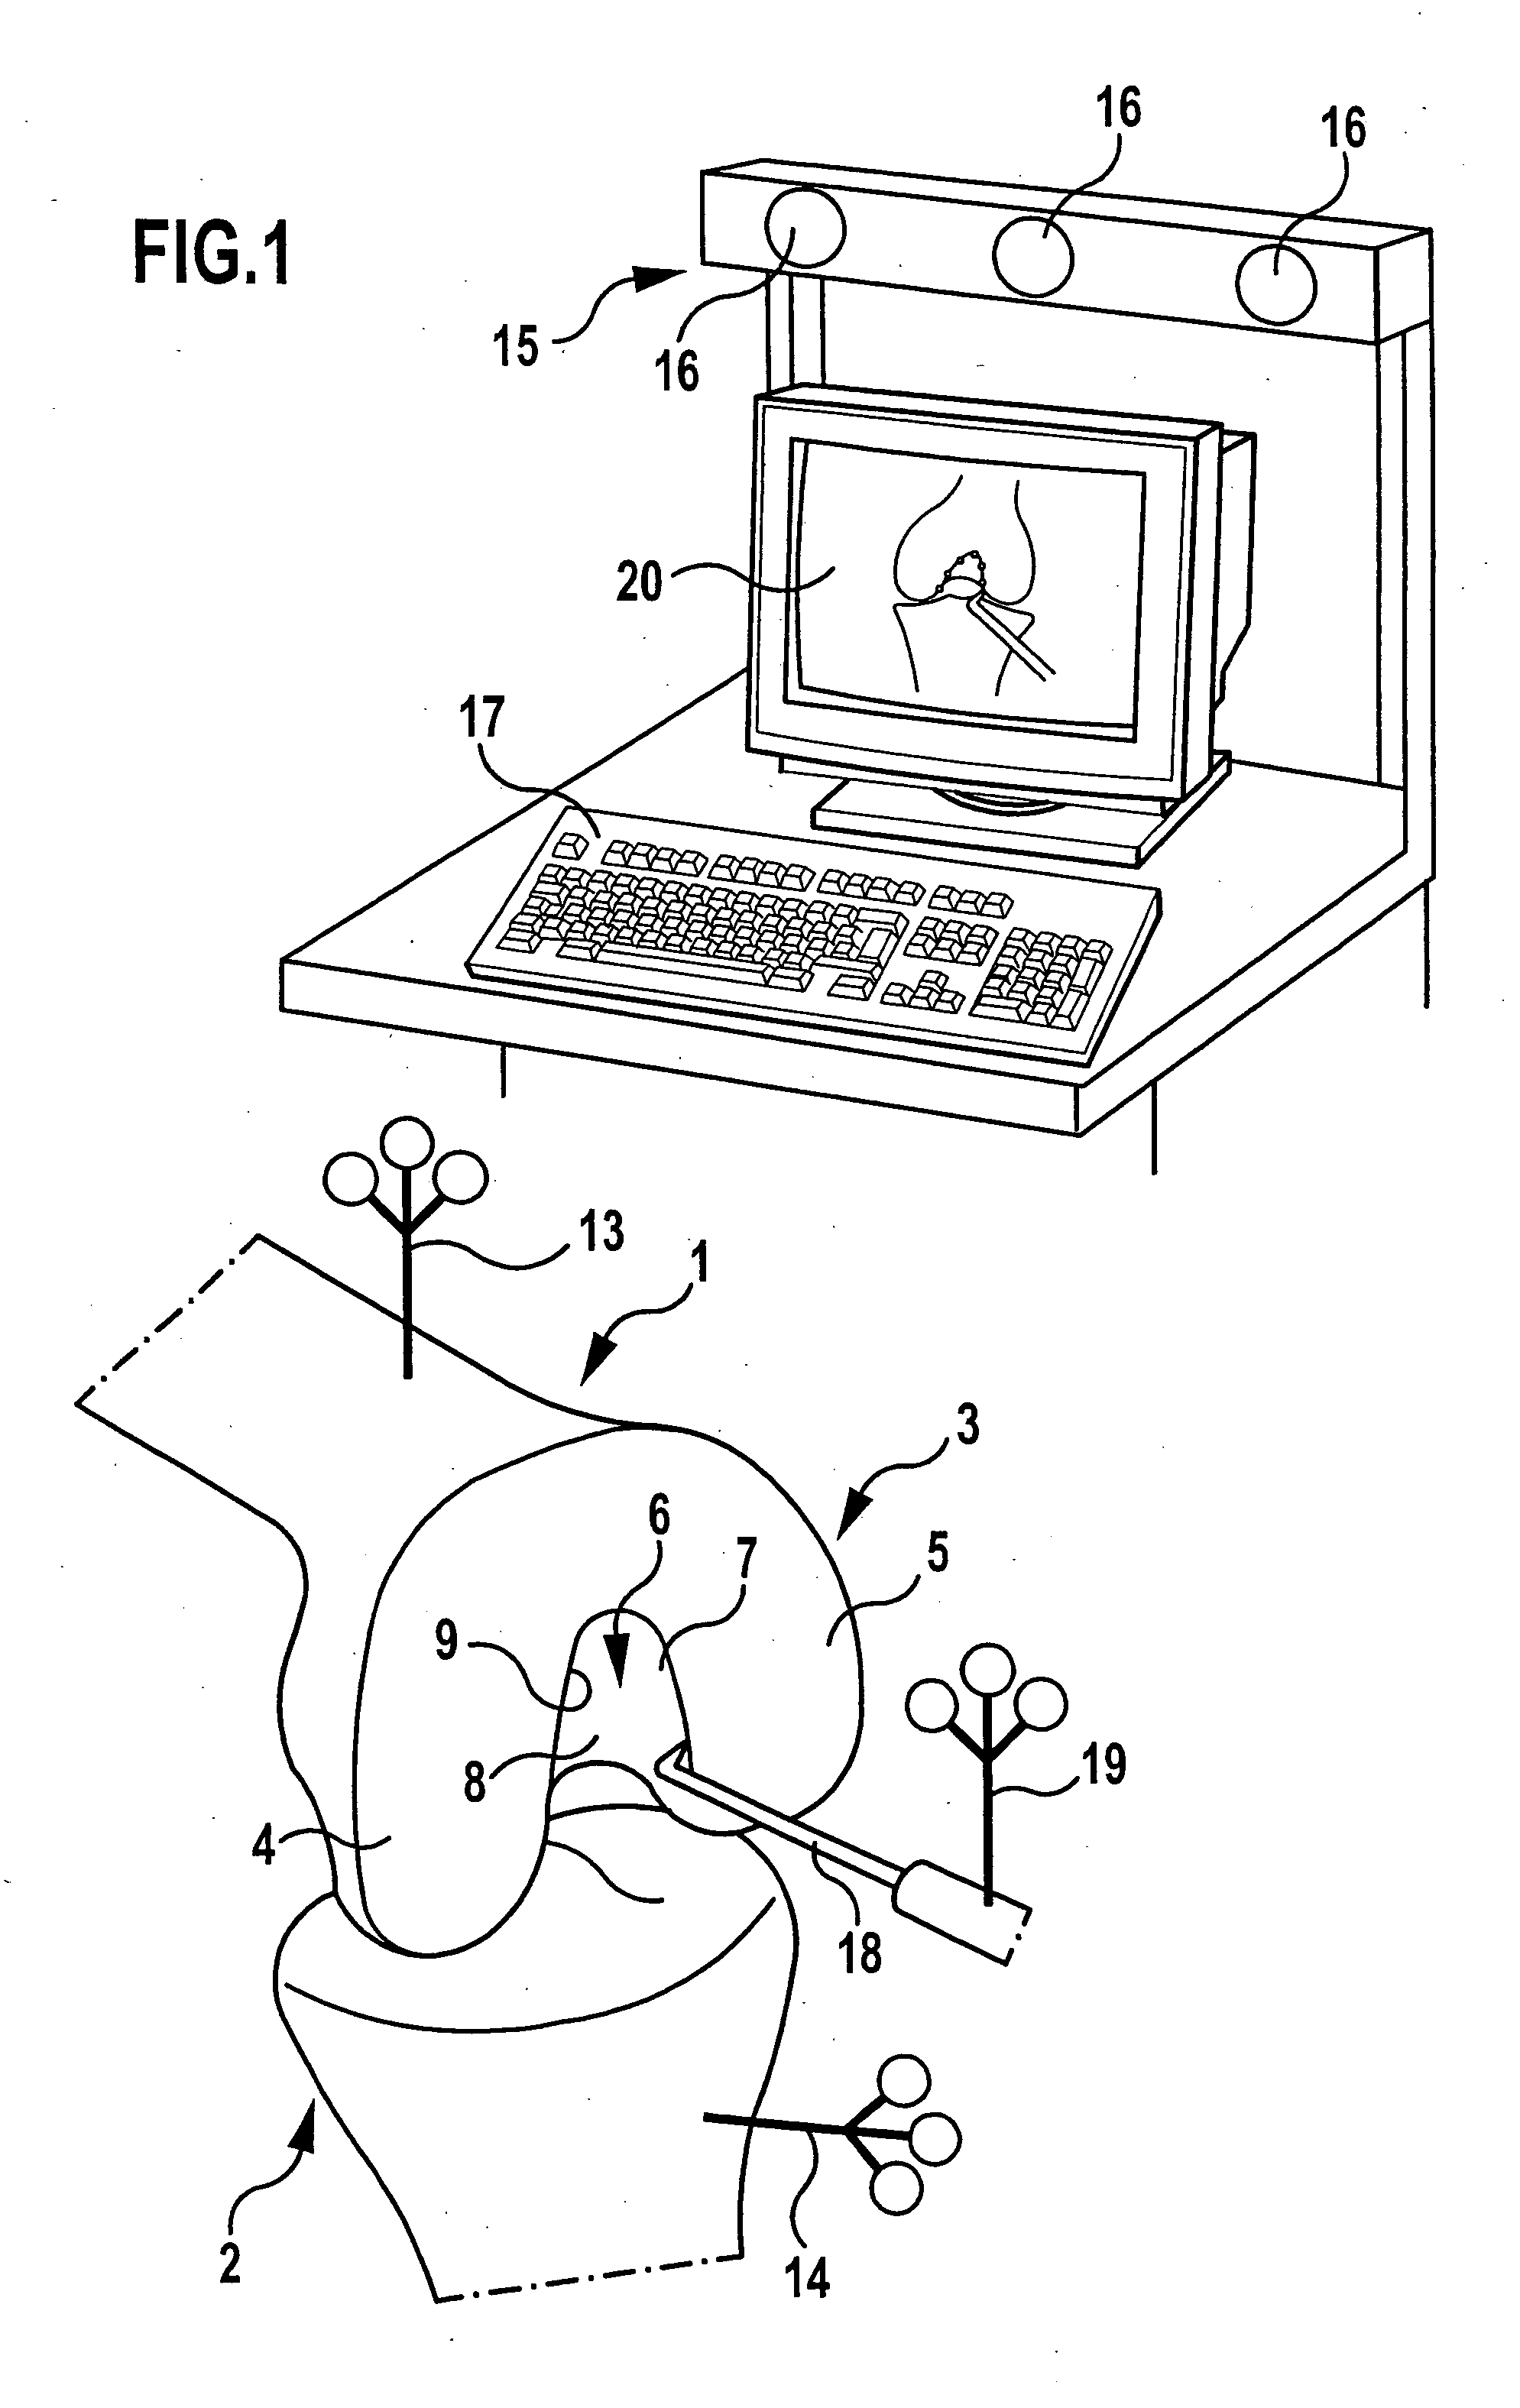 Method and apparatus for determining the position of the tibial exit point of the anterior cruciate ligament